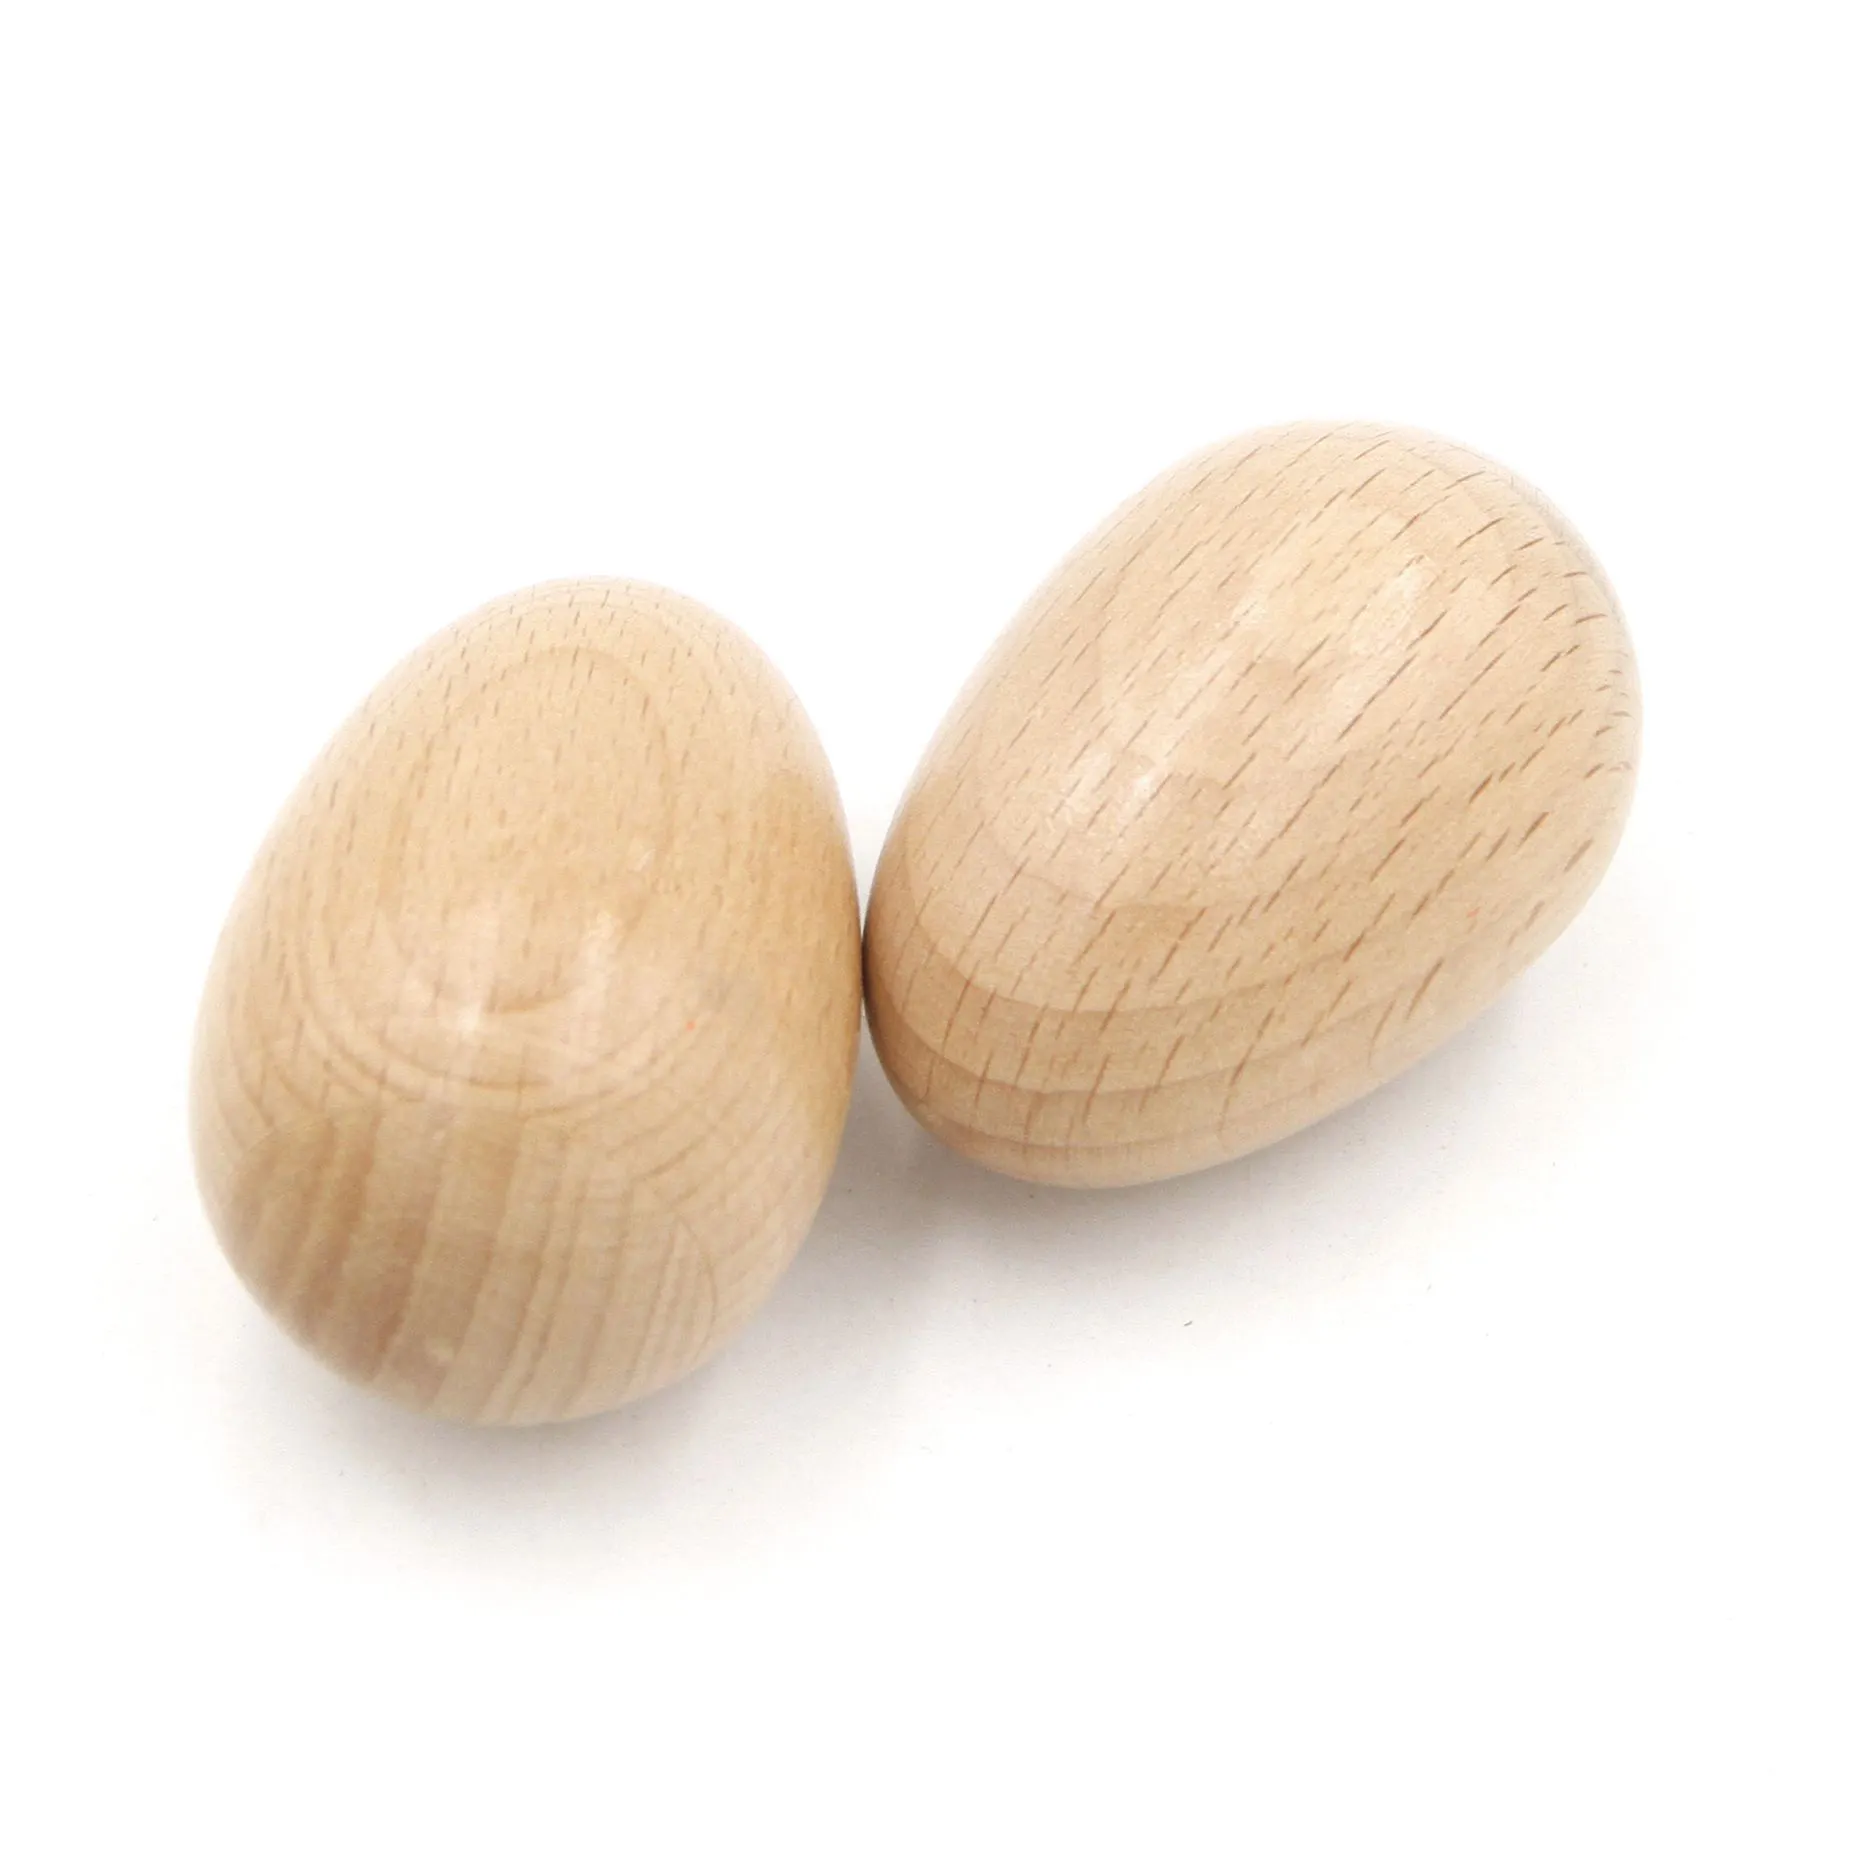 Hot Selling EHN-46  wood natural color egg shaker, Maracas, toy musical instruments , musical toy